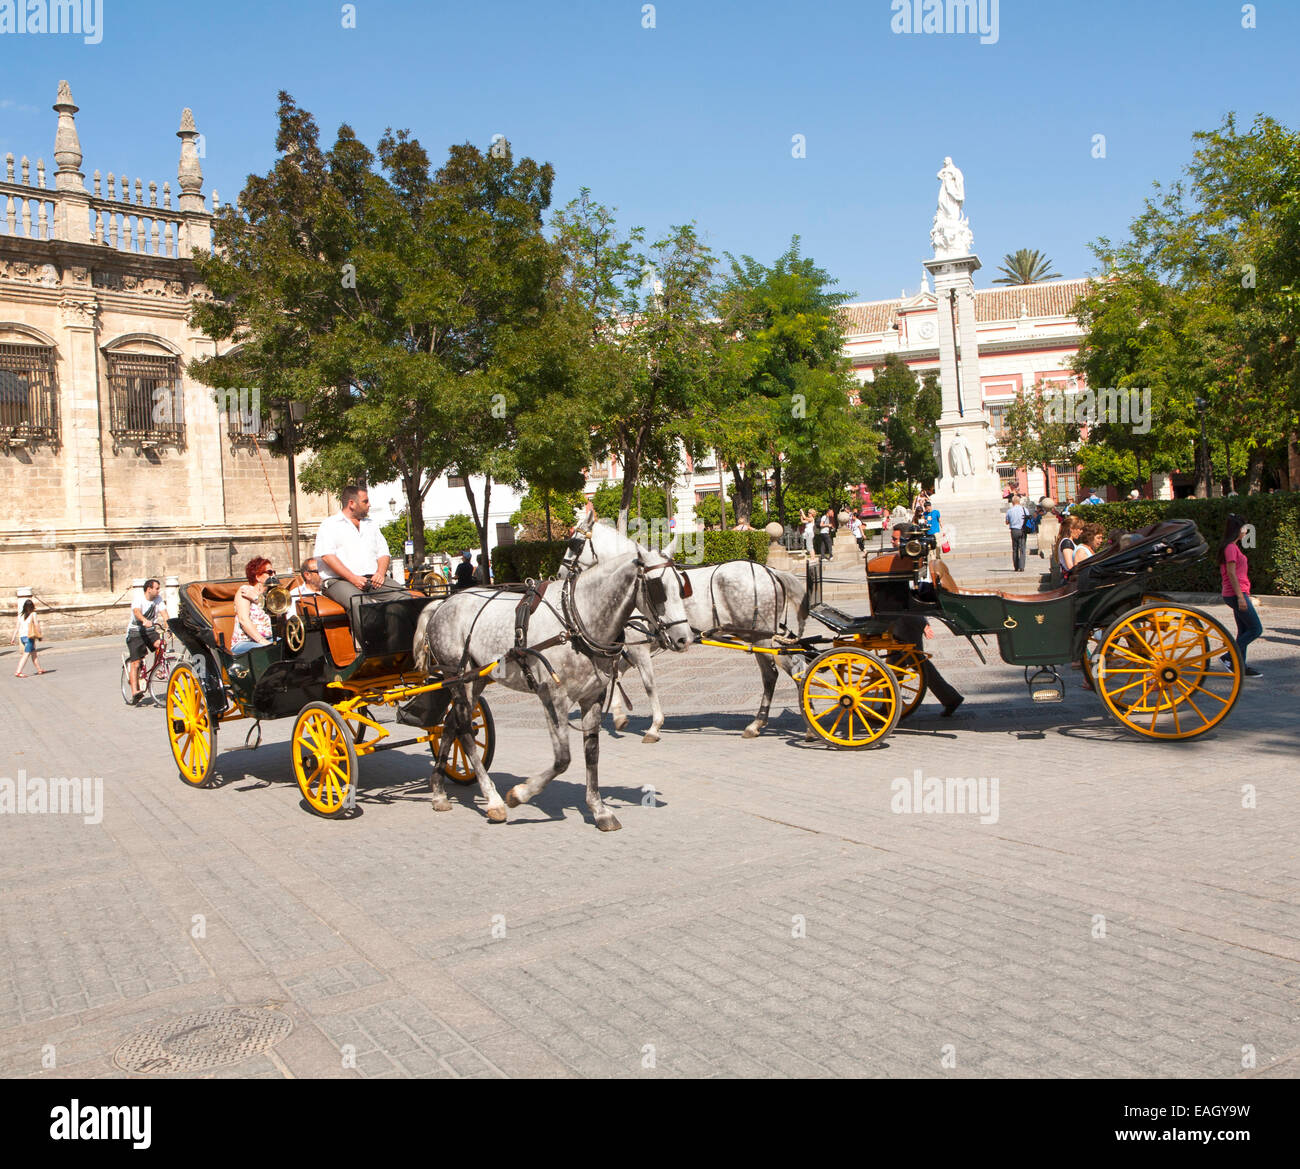 Horse and carriage rides for tourists through the historic central areas in Plaza del Triunfo, Seville, Spain Stock Photo